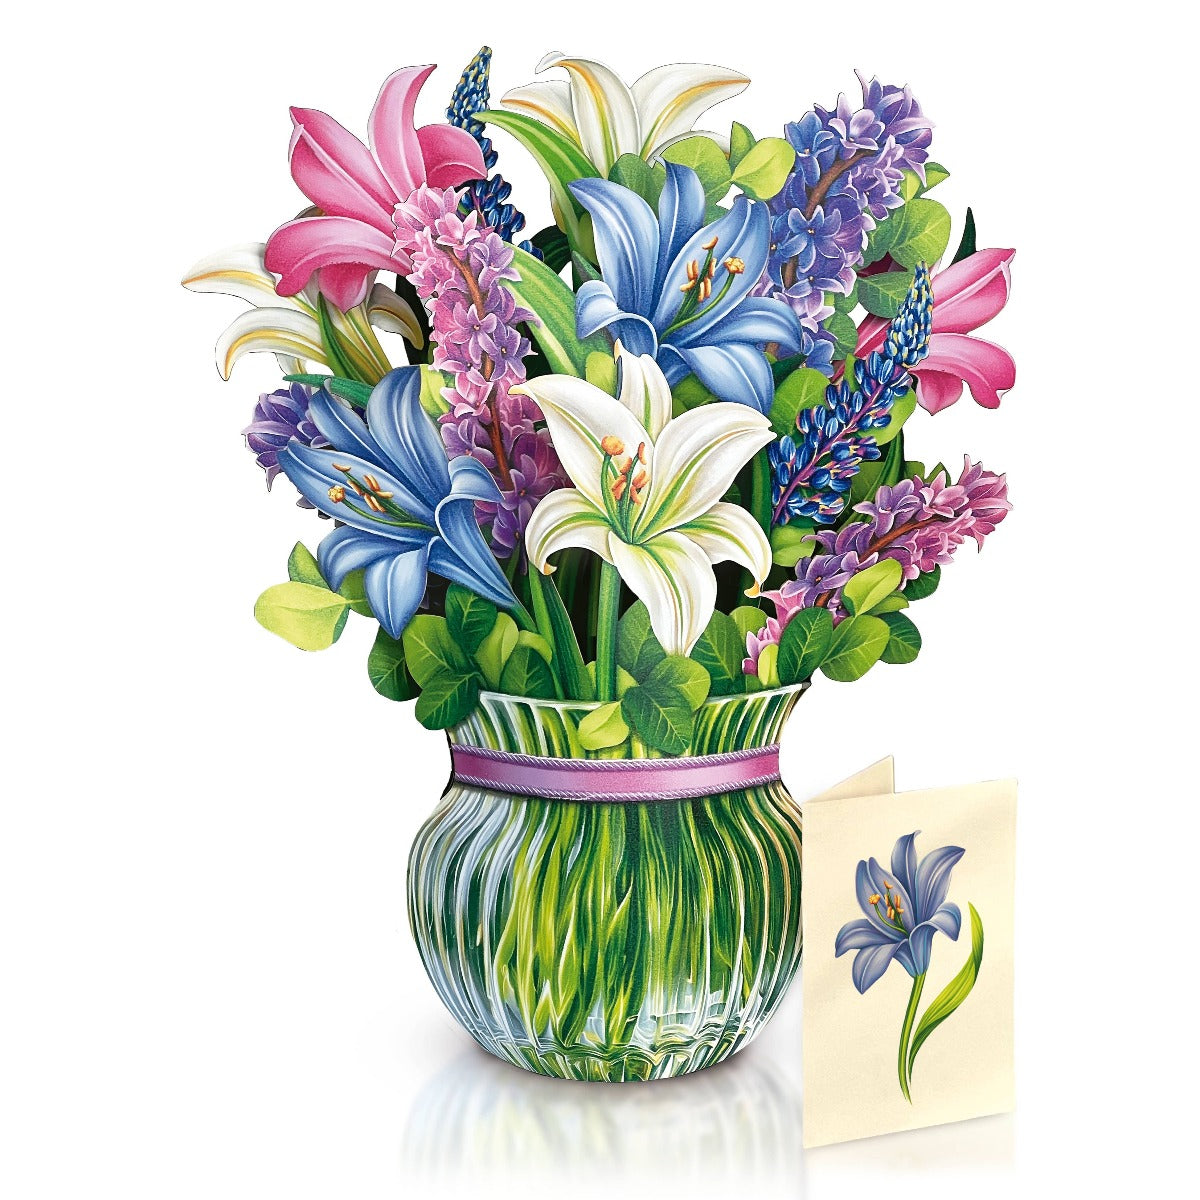 Lilies & Lupines Pop-up Greeting Card- A perfect gift Media 1 of 2